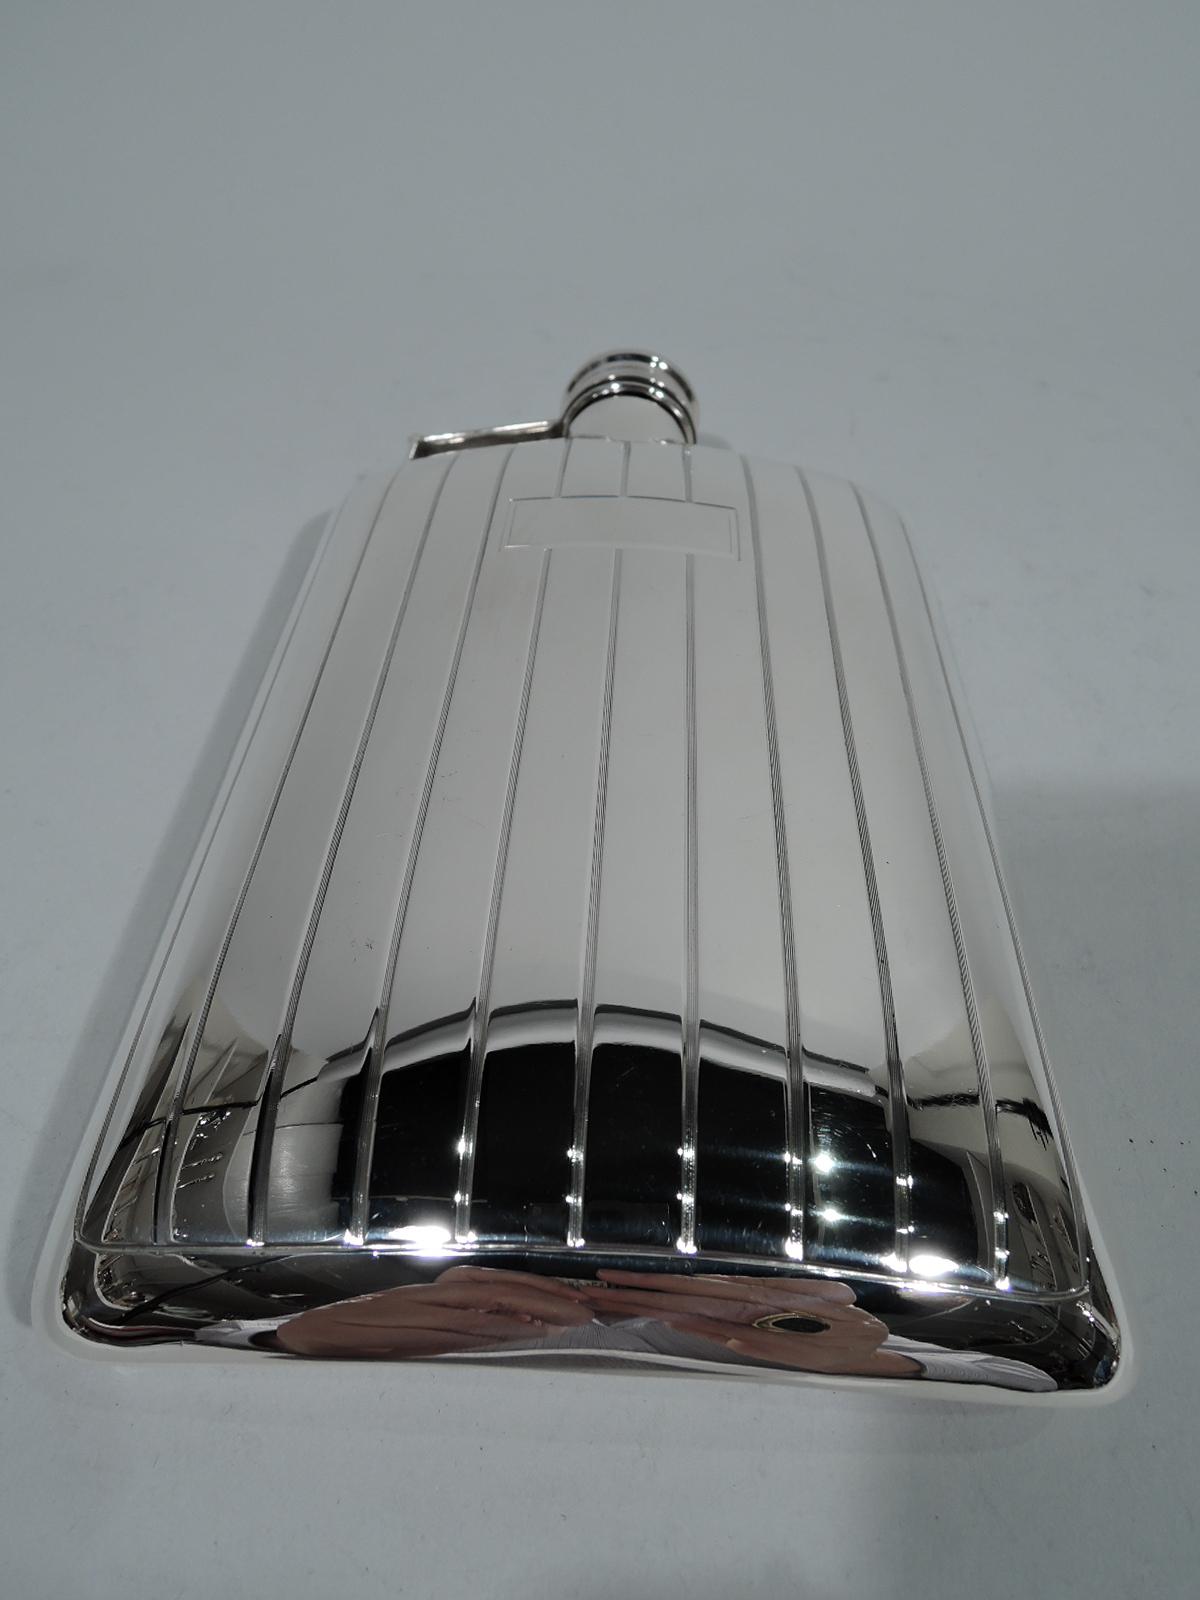 Art Deco sterling silver flask. Curved and rectangular body with hinged and cork-lined cover. Band has reeded lines alternating with wide and plain bands. Rectangular frame (vacant). Back plain. Marks includes maker’s stamp Meriden Britannia (part